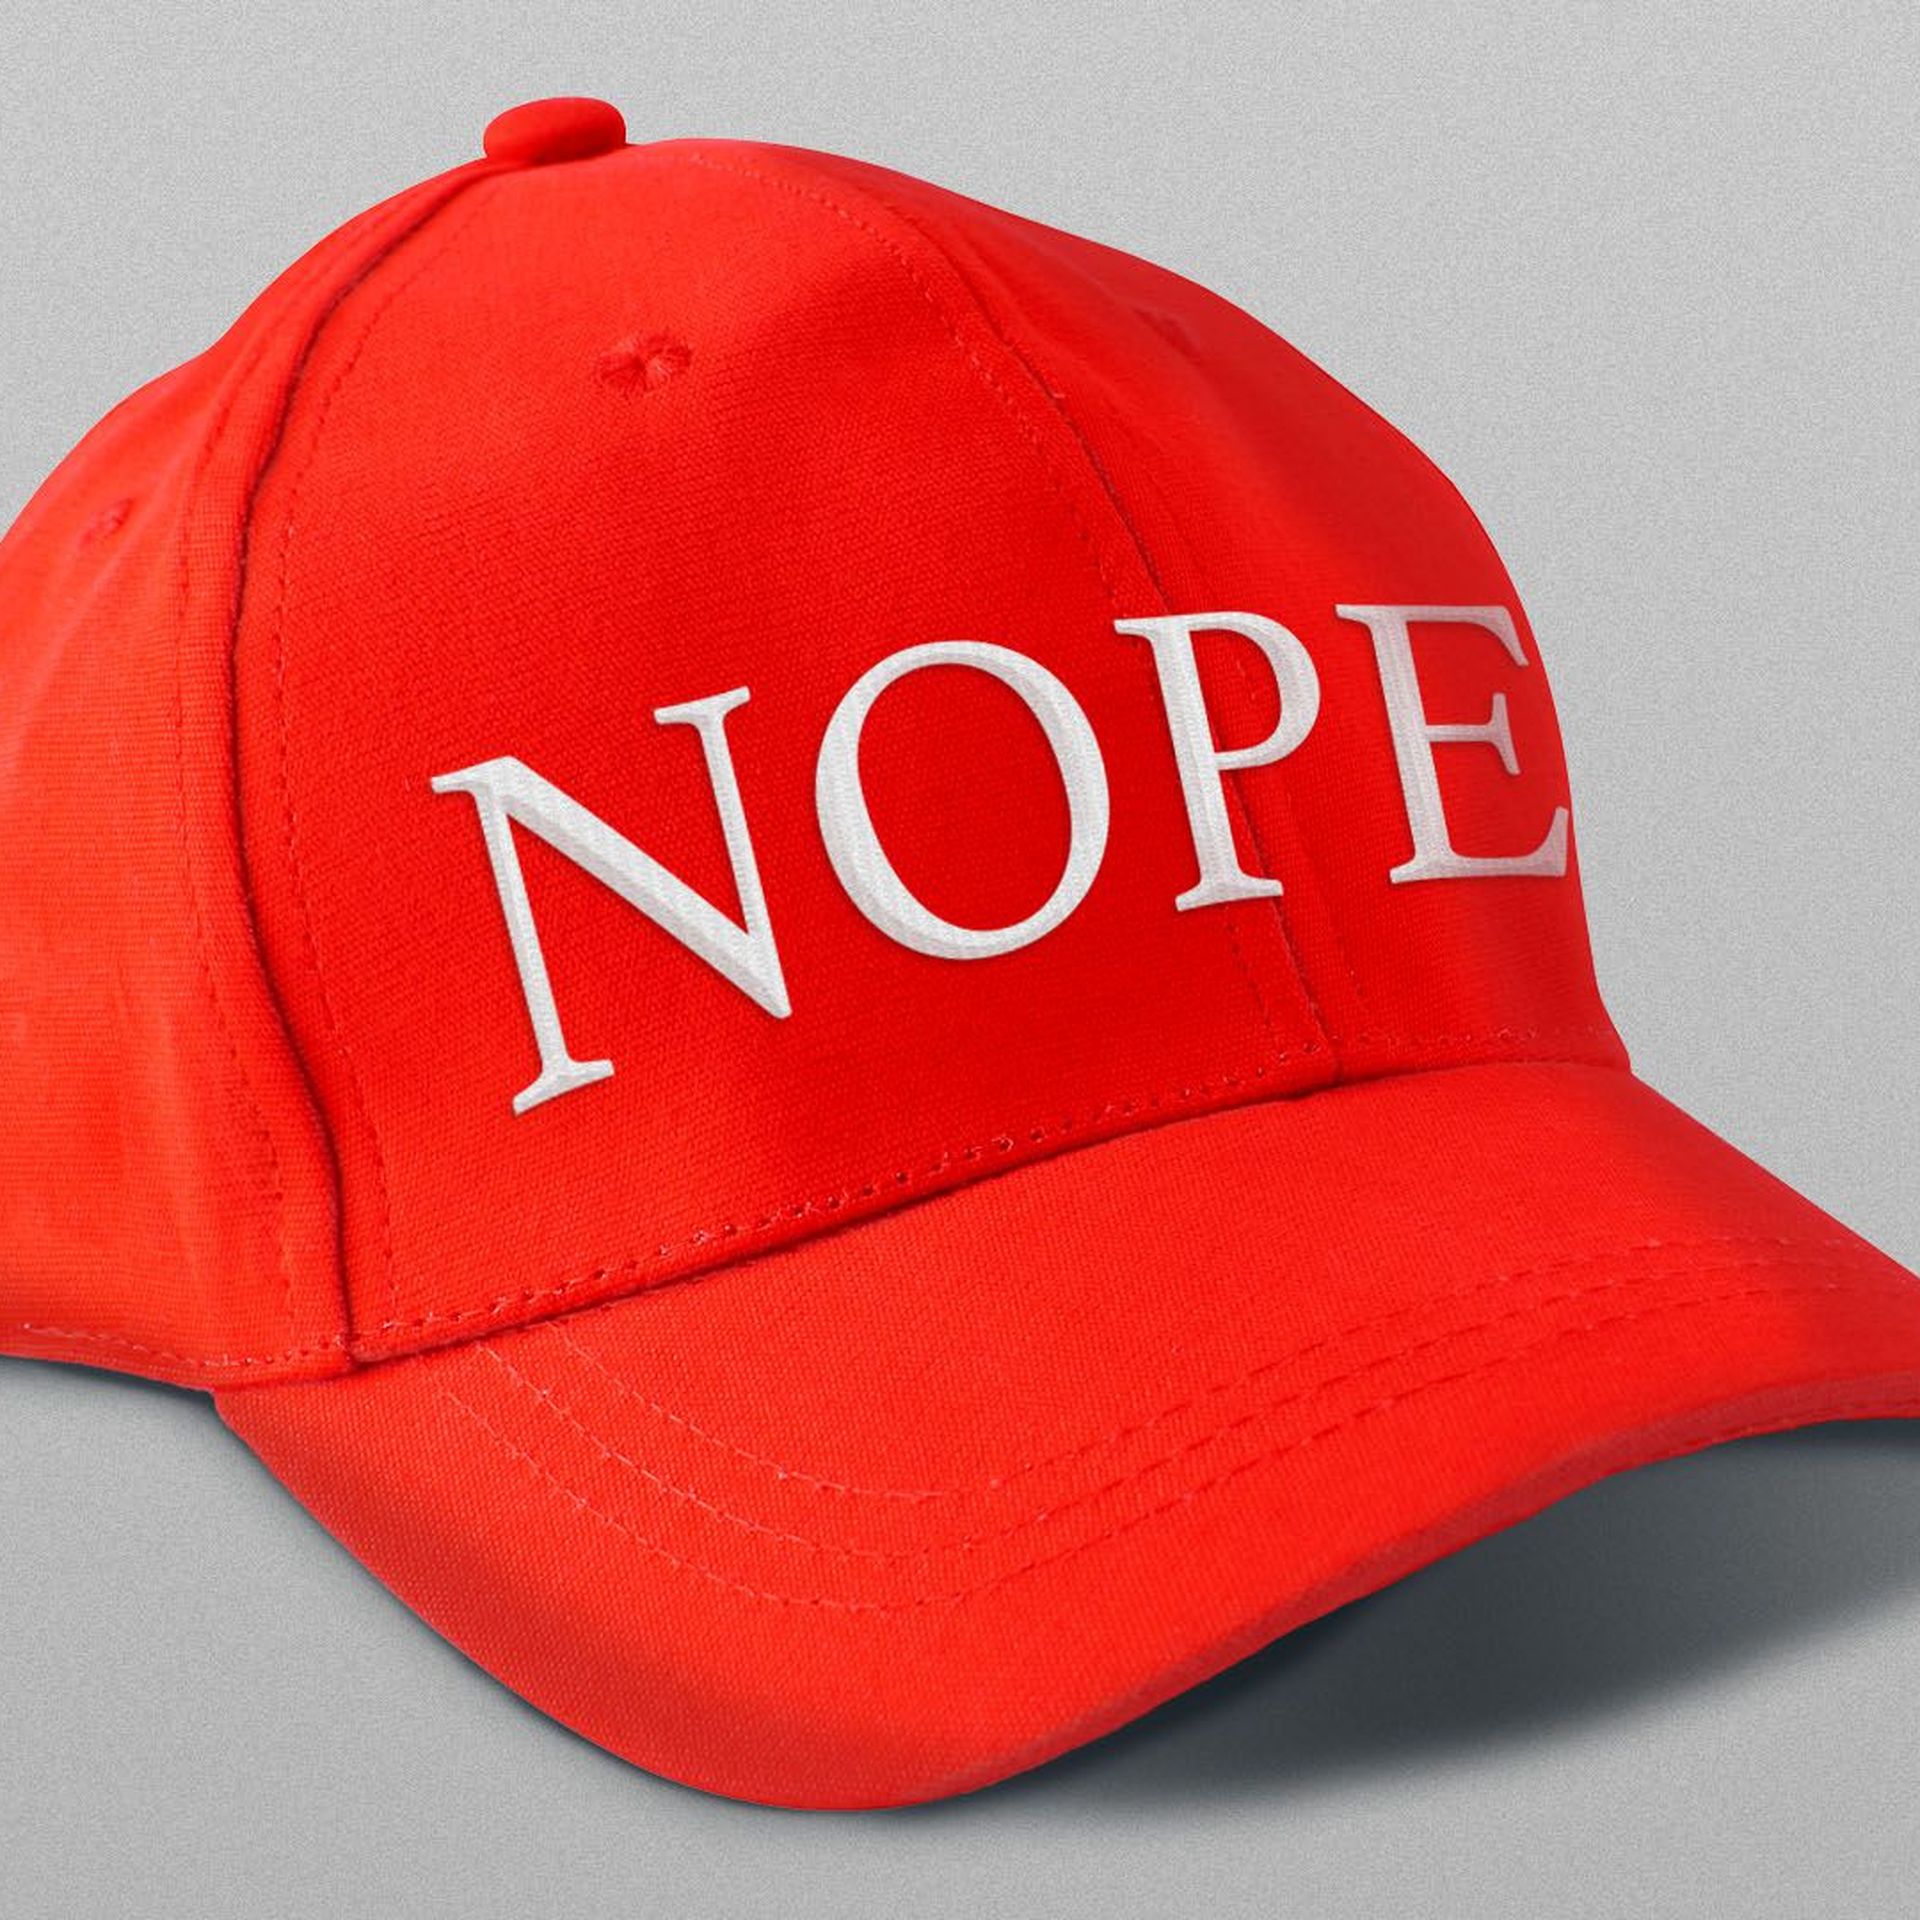 Illustration of a red Maga-like baseball cap that reads "nope"